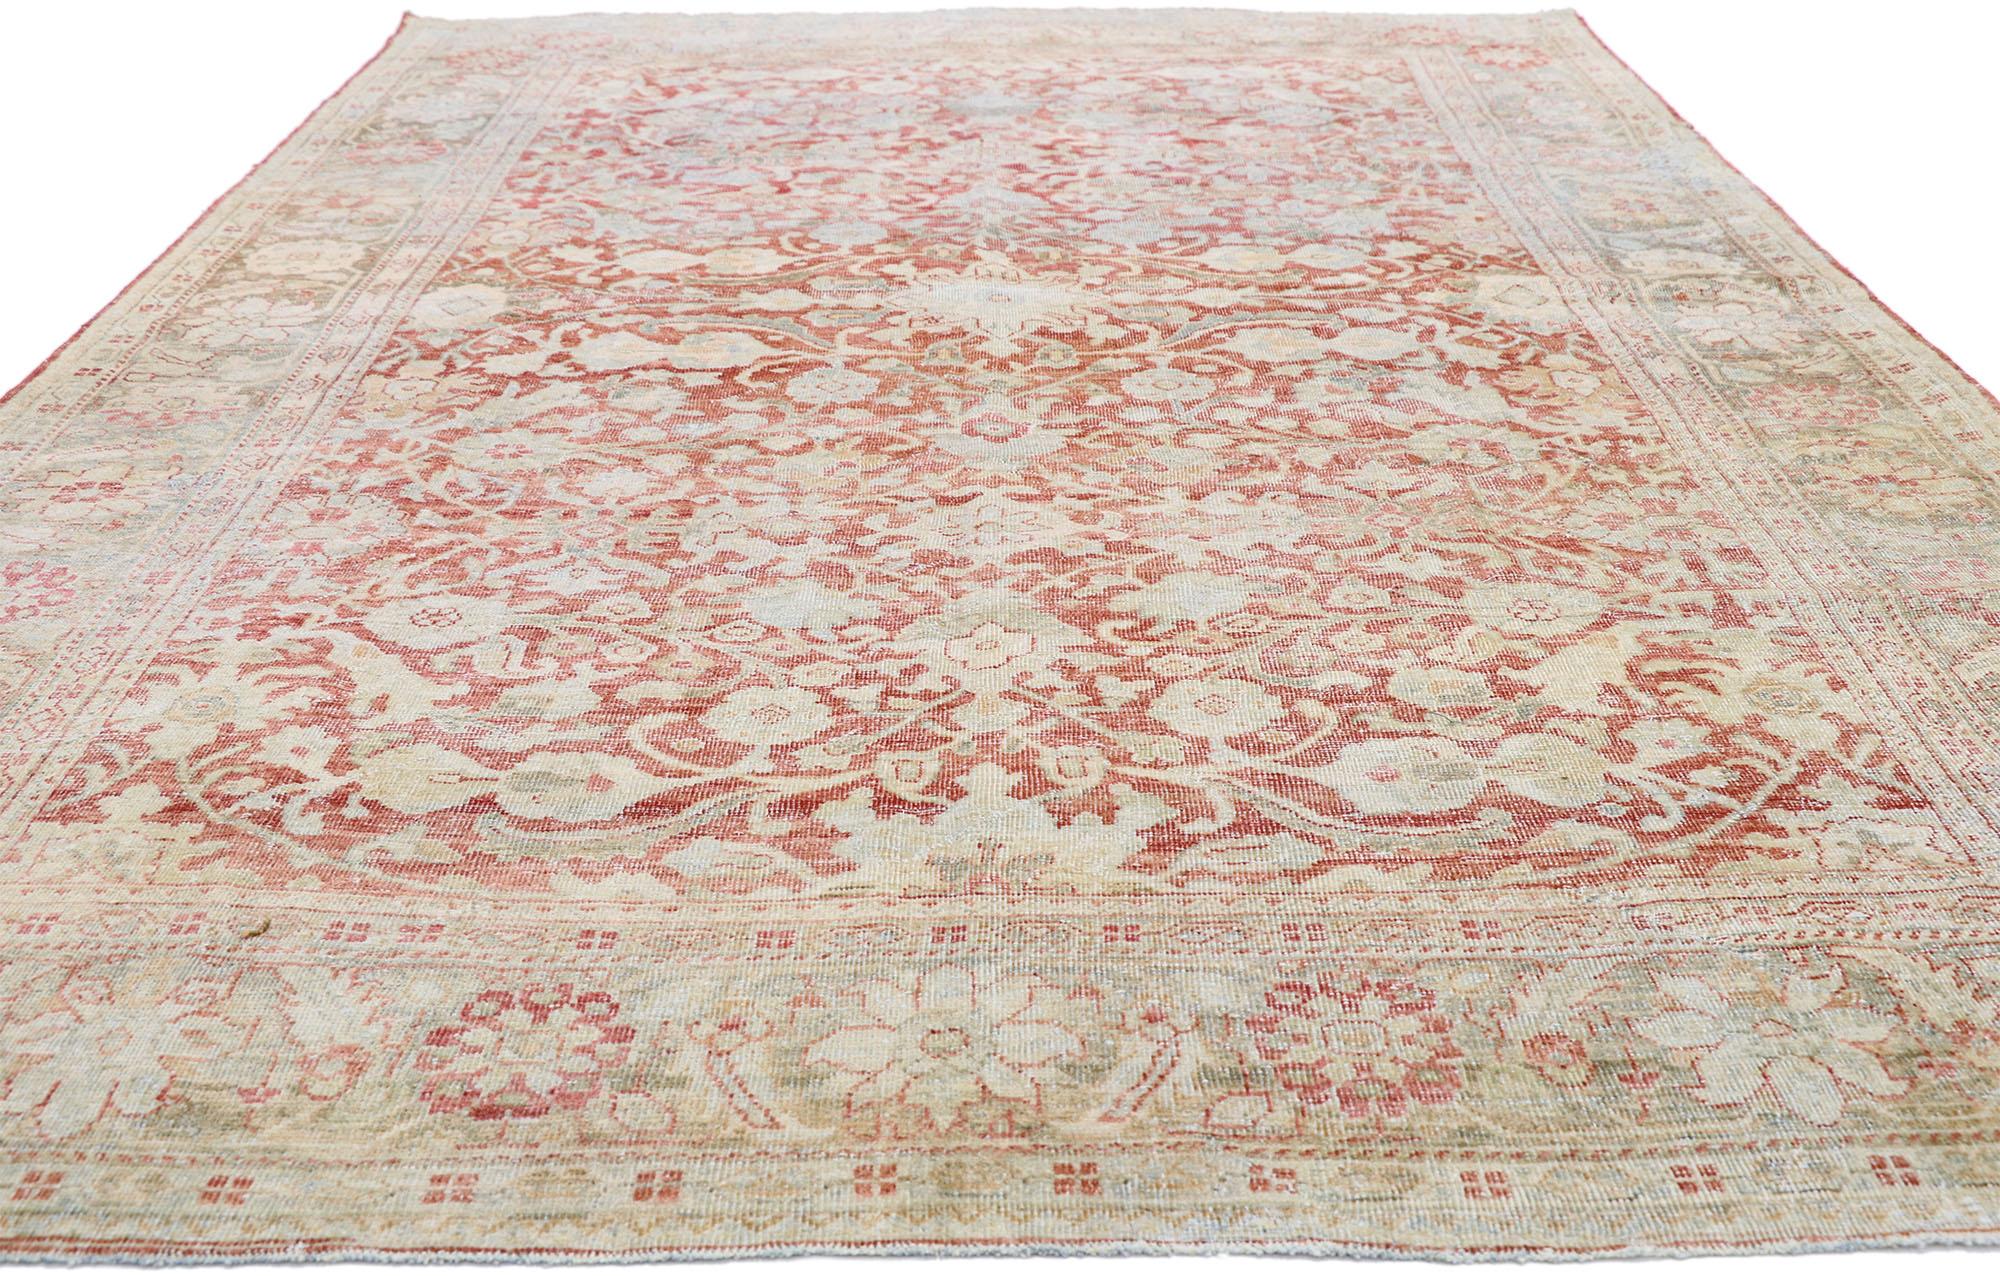 Turkish Distressed Antique Persian Mahal Design Rug with Relaxed Federal Style For Sale